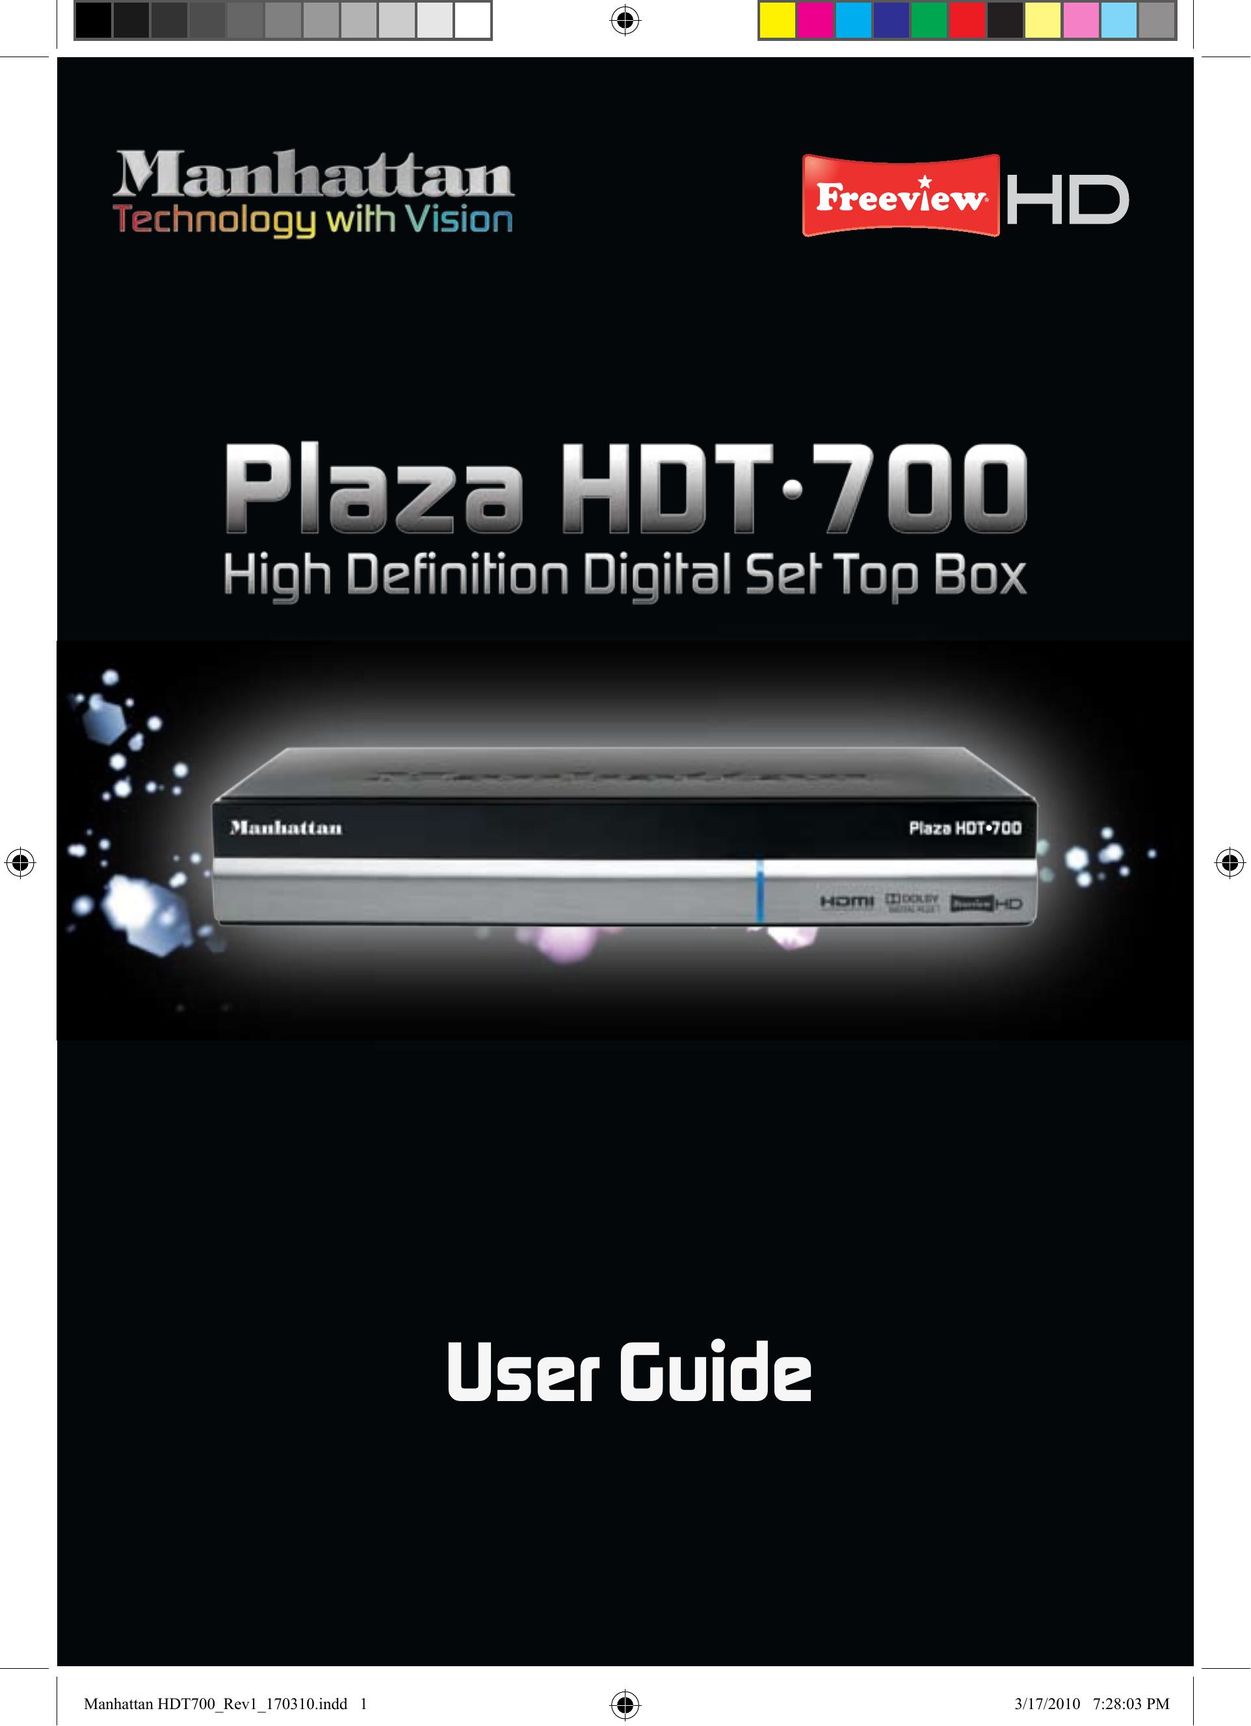 Manhattan Computer Products Plaza HDT-700 Cable Box User Manual